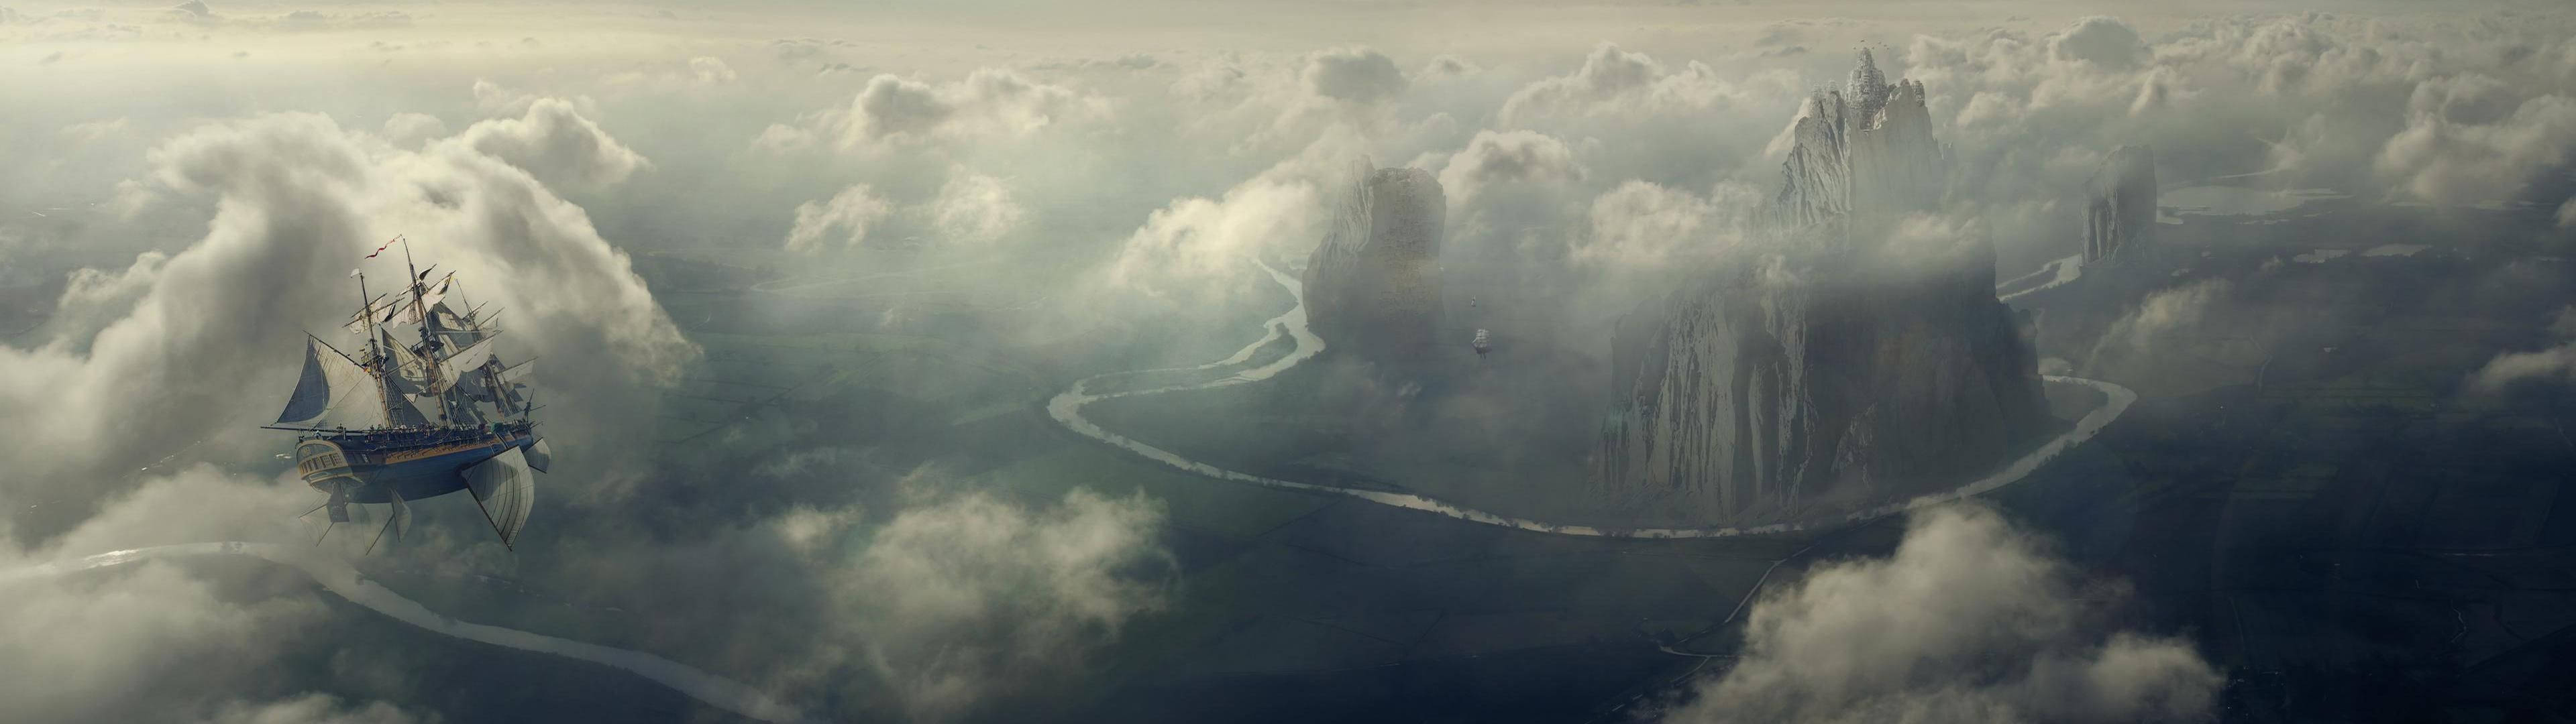 An Epic View Of A Ship Floating Amidst Clouds In The Sky